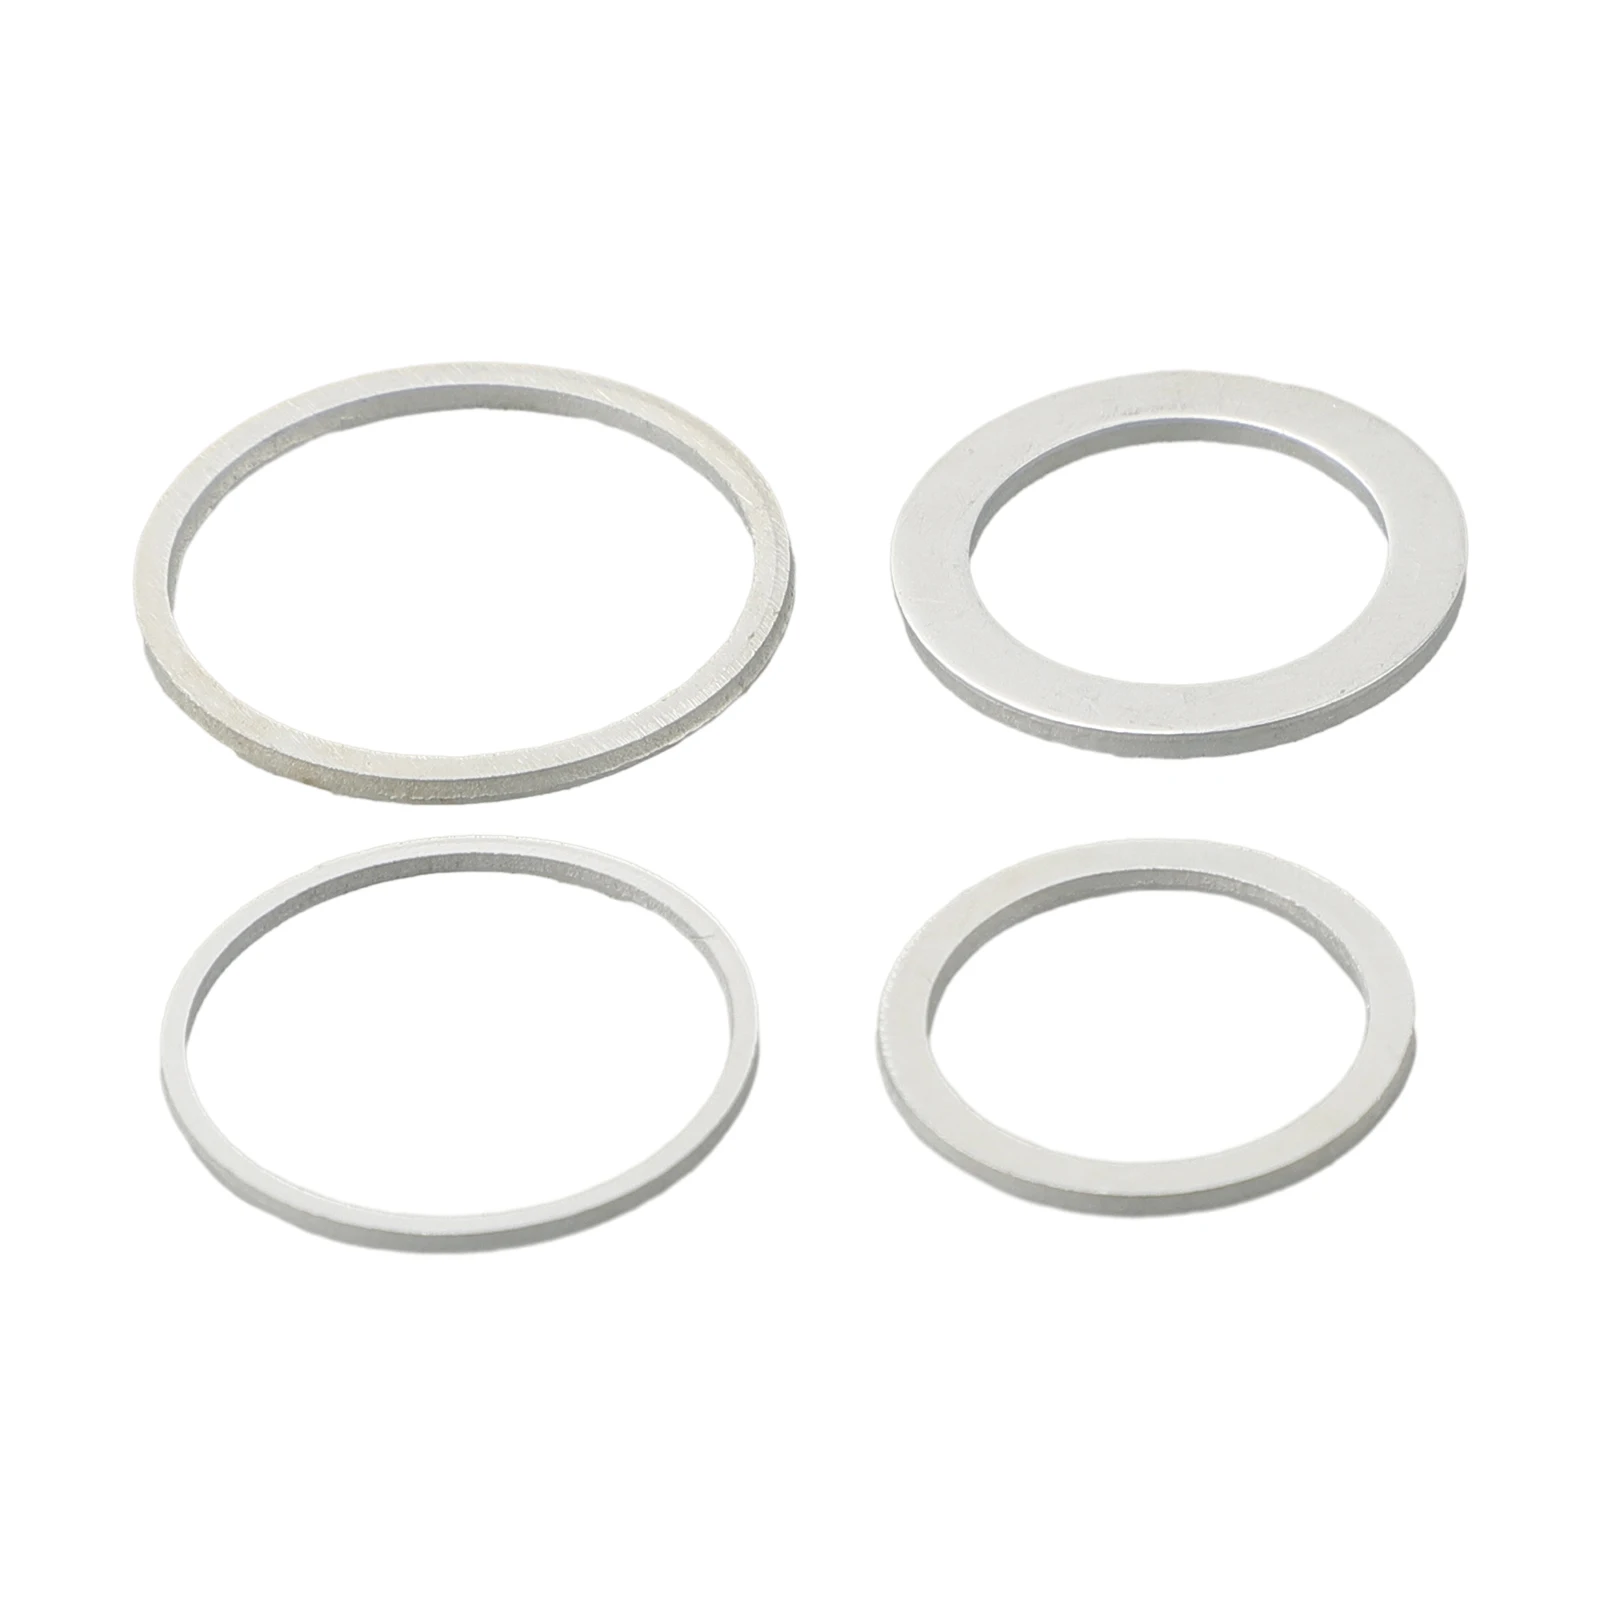 

Circular Saw Ring 4 Sizes 4Pcs Conversion Ring High Quality Replacement Silver For Circular Saw Blade Protable